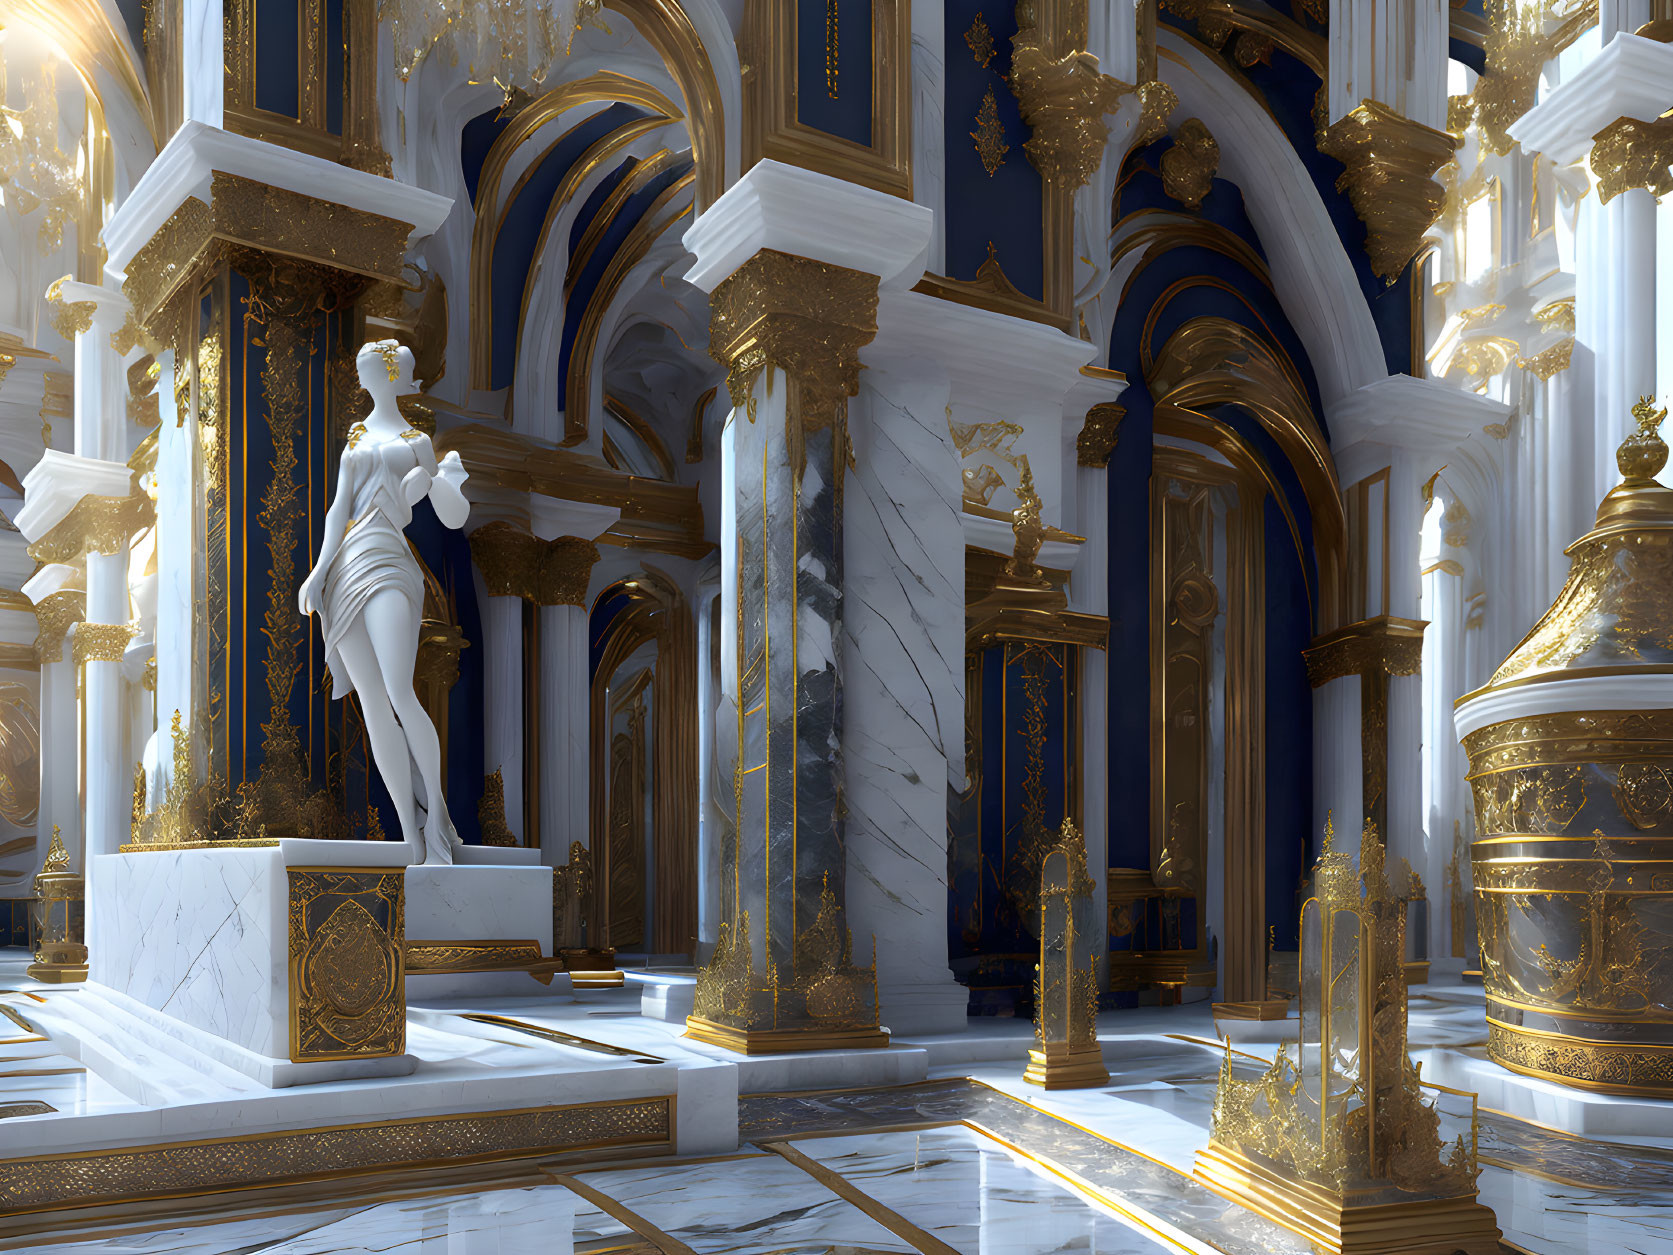 Luxurious interior with marble floors, gold accents, grand arches, and central statue.